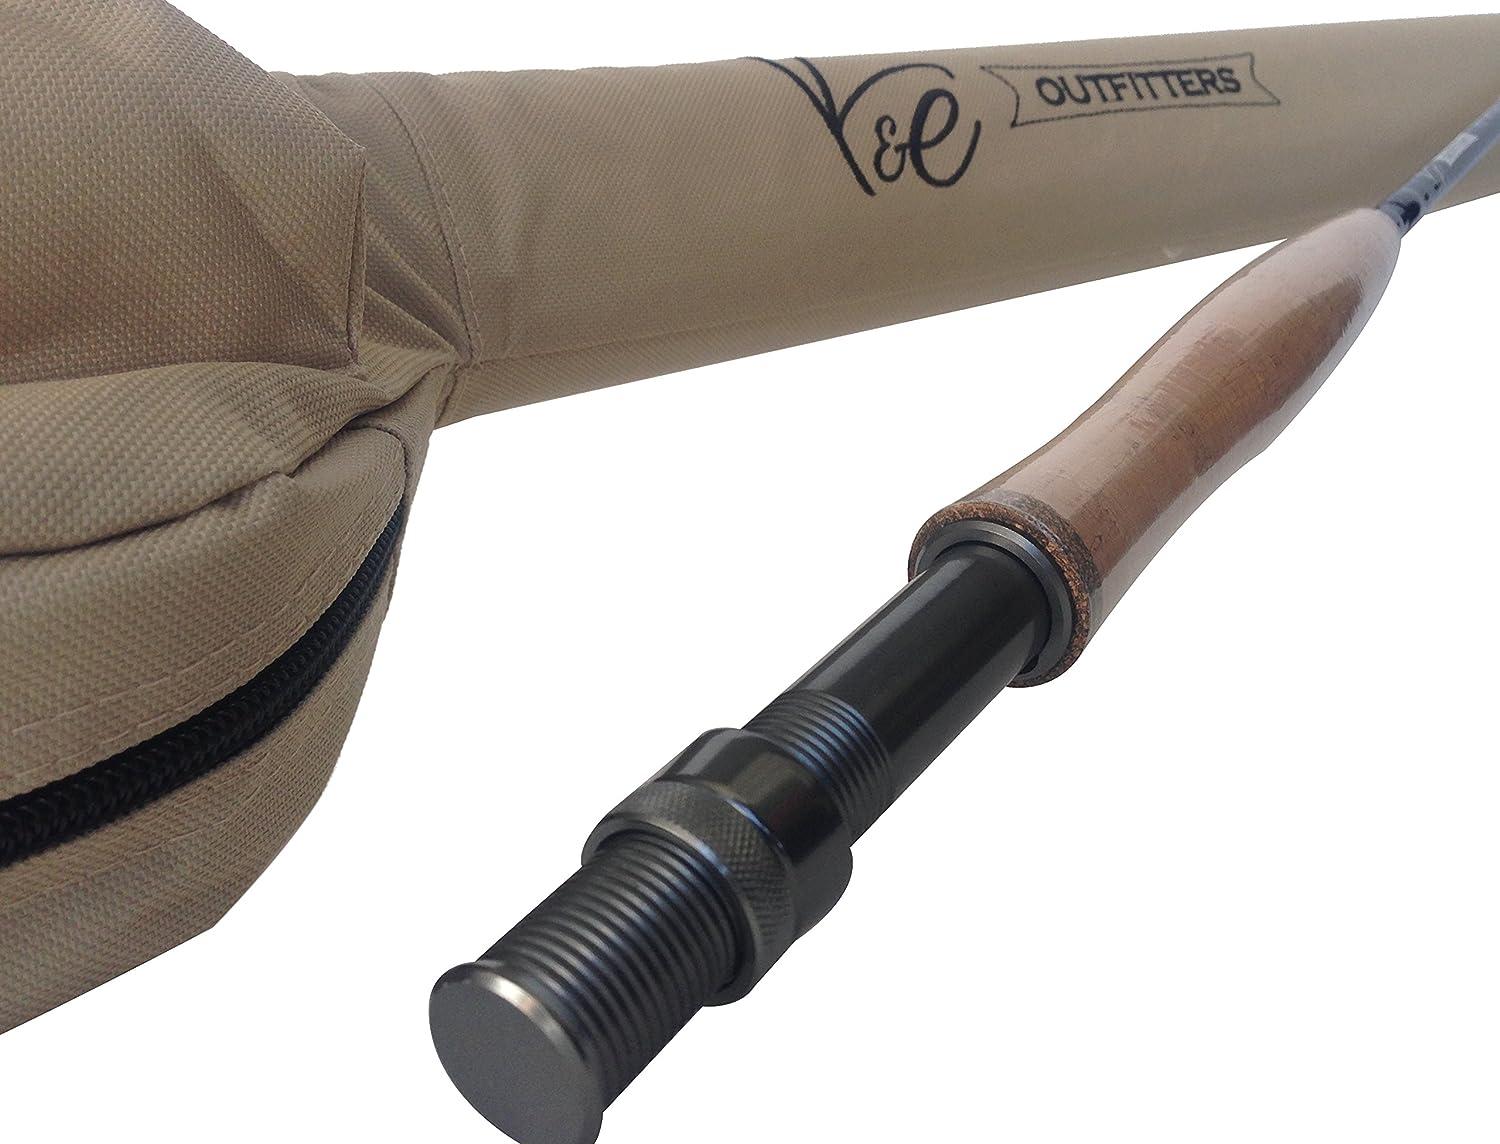 K&E Outfitters Drift Series 5wt Fly Fishing Rod and Reel Complete